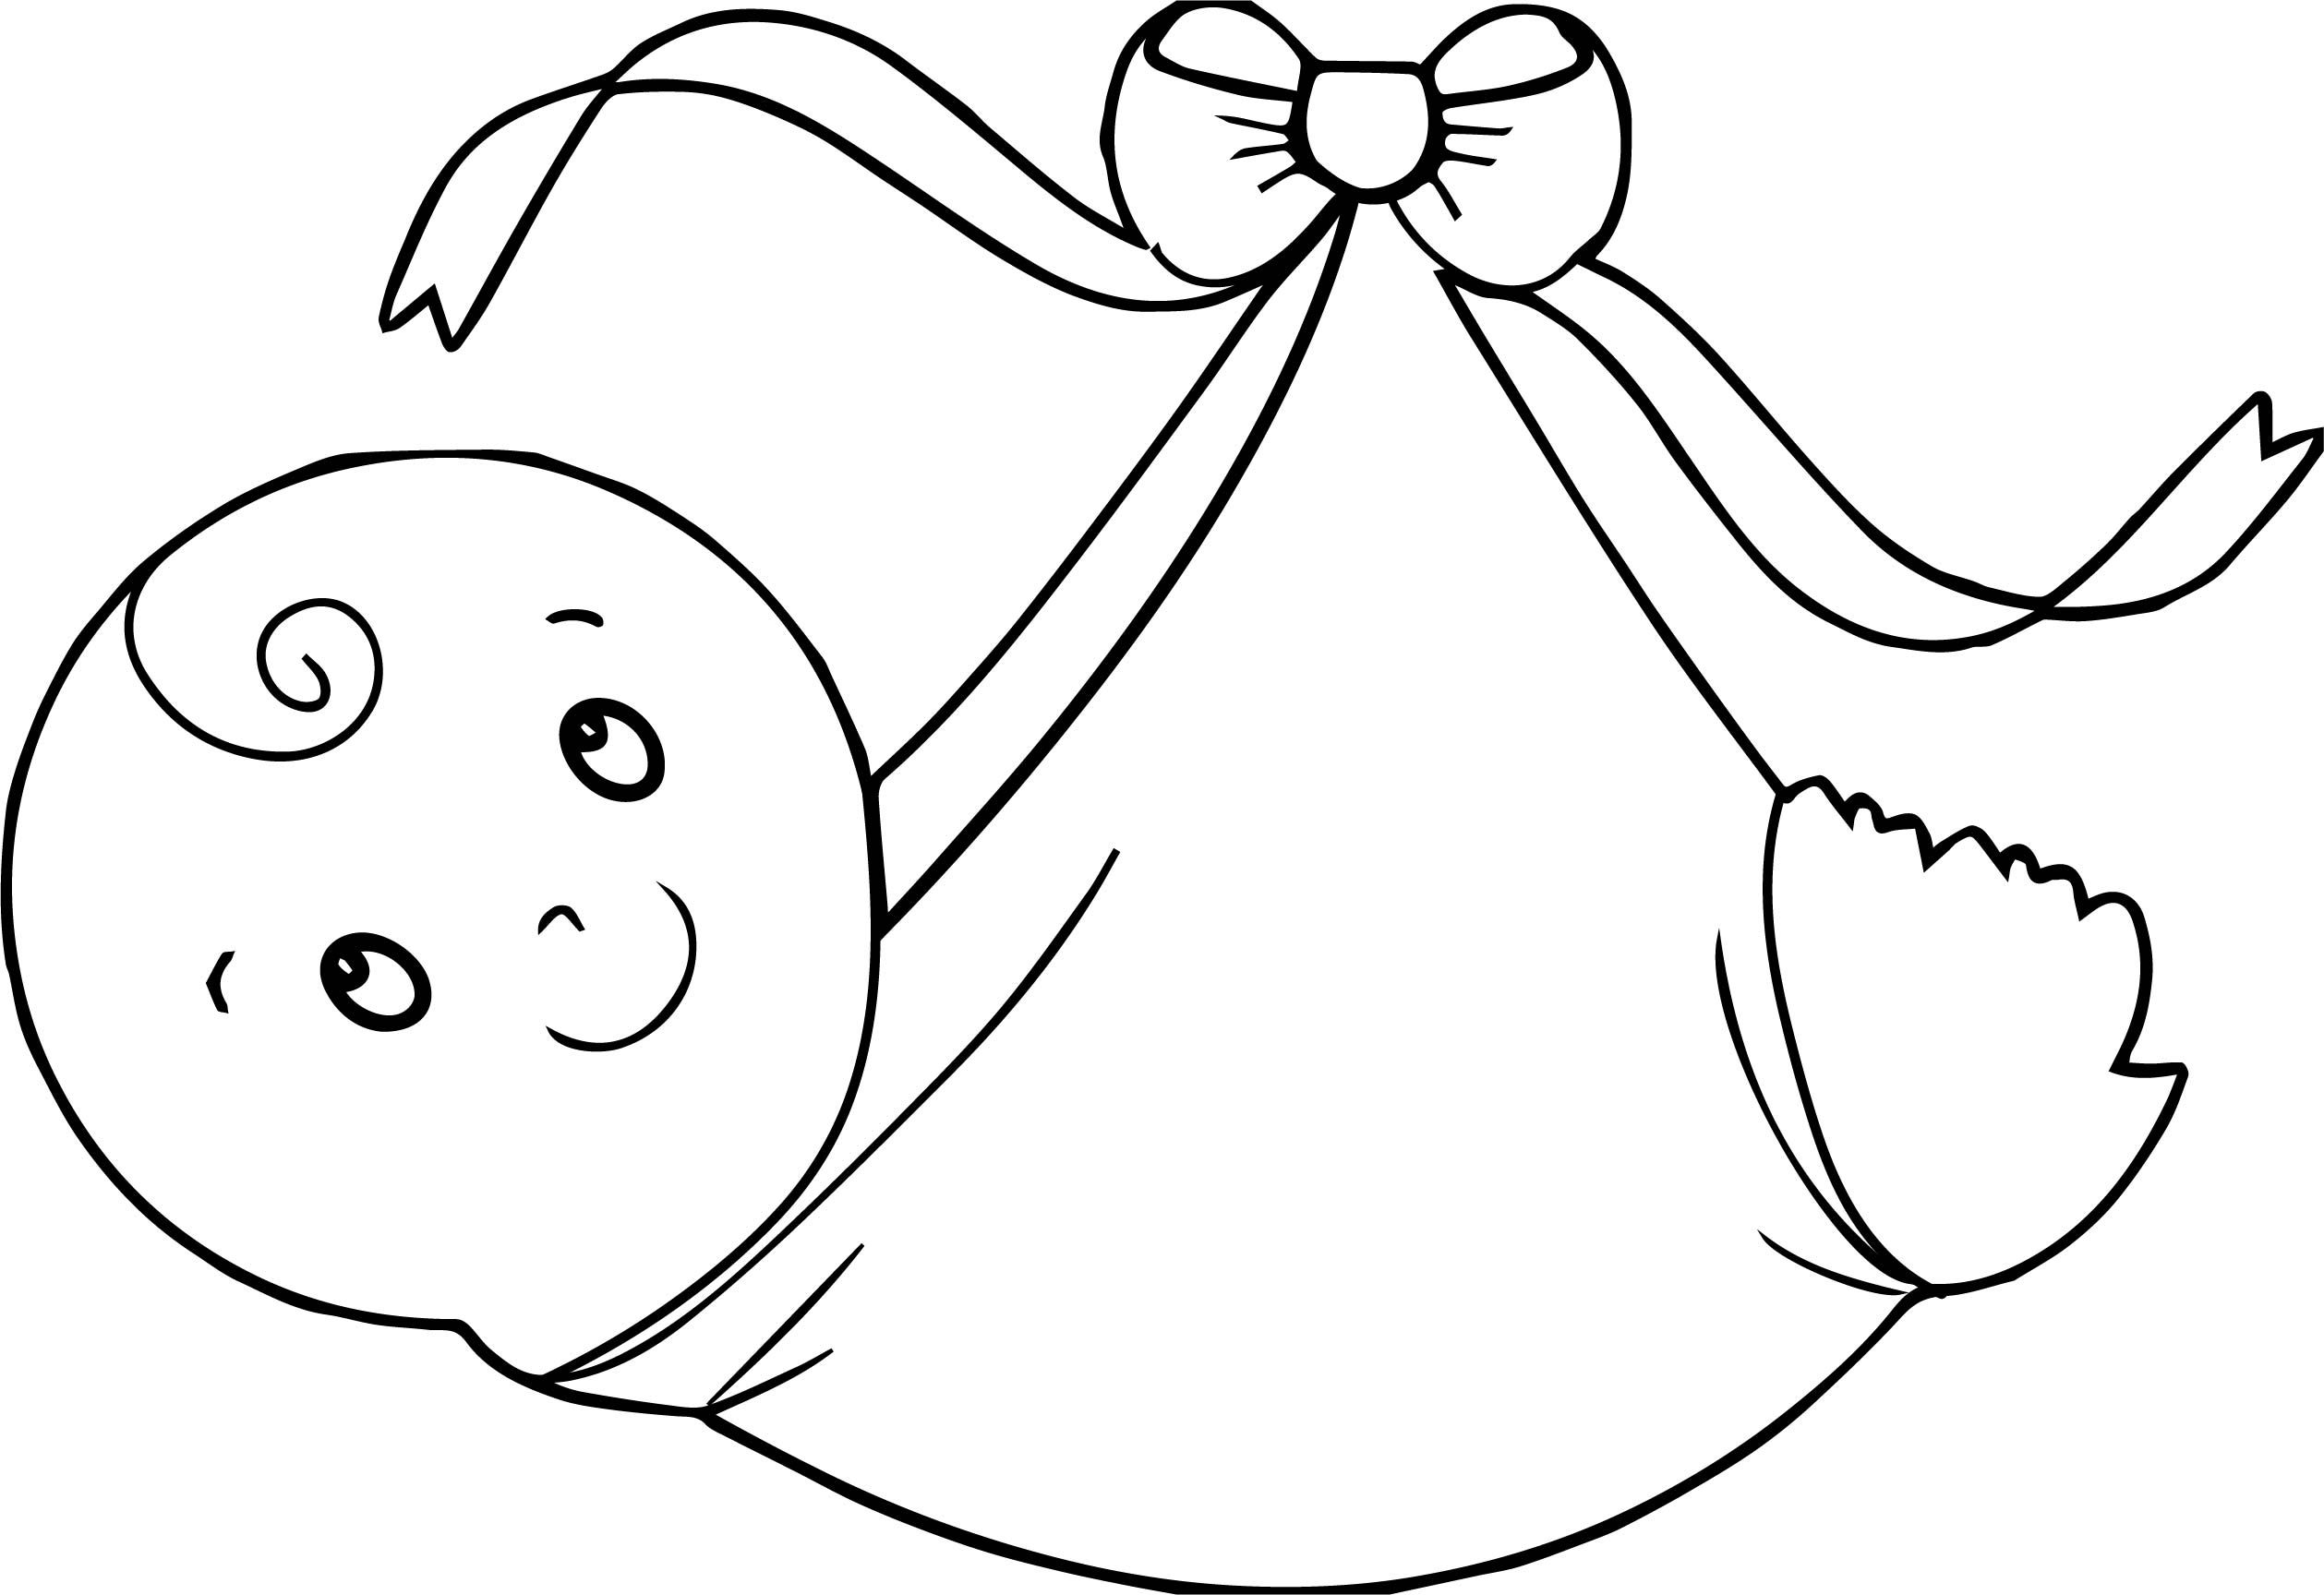 Swaddling Clothes Baby Boy Coloring Page.